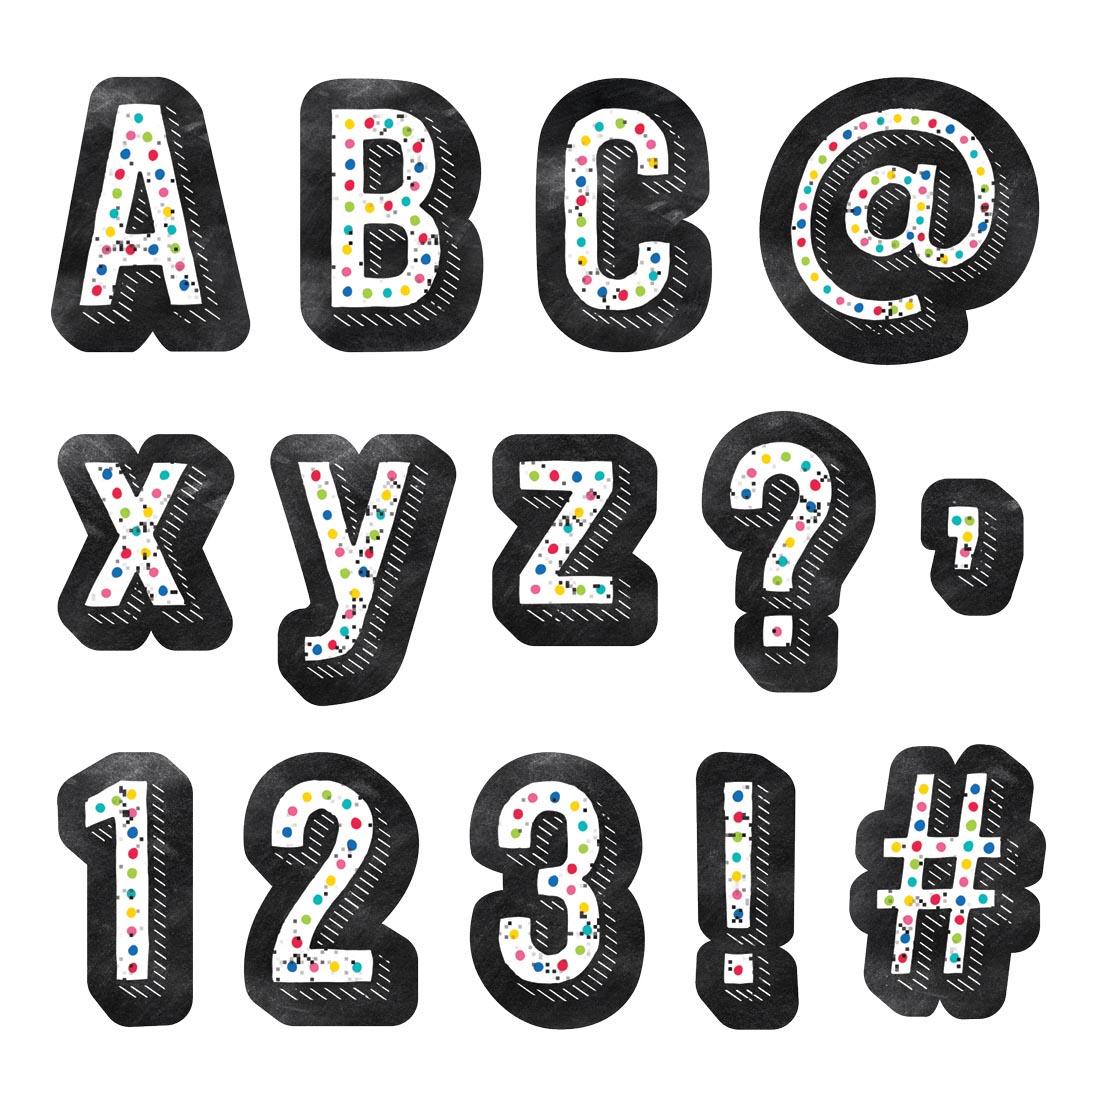 Colorful Chalk 4" Designer Letters from the Chalk It Up! Collection By Creative Teaching Press